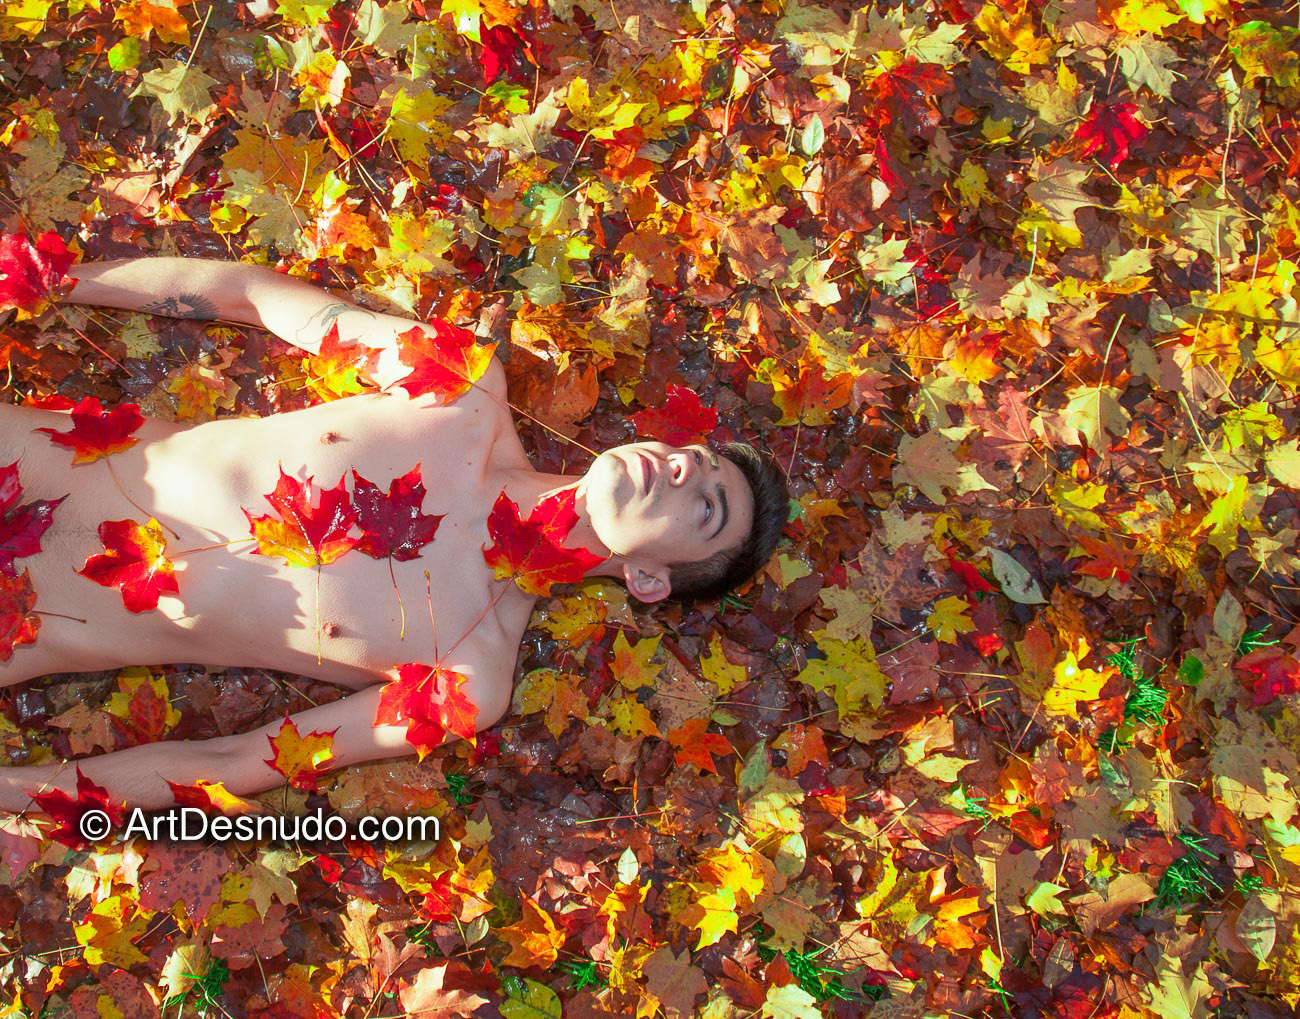 I love Autumn colors. Let’s Create Art with your Body and Mother Nature! Model: Ivan.